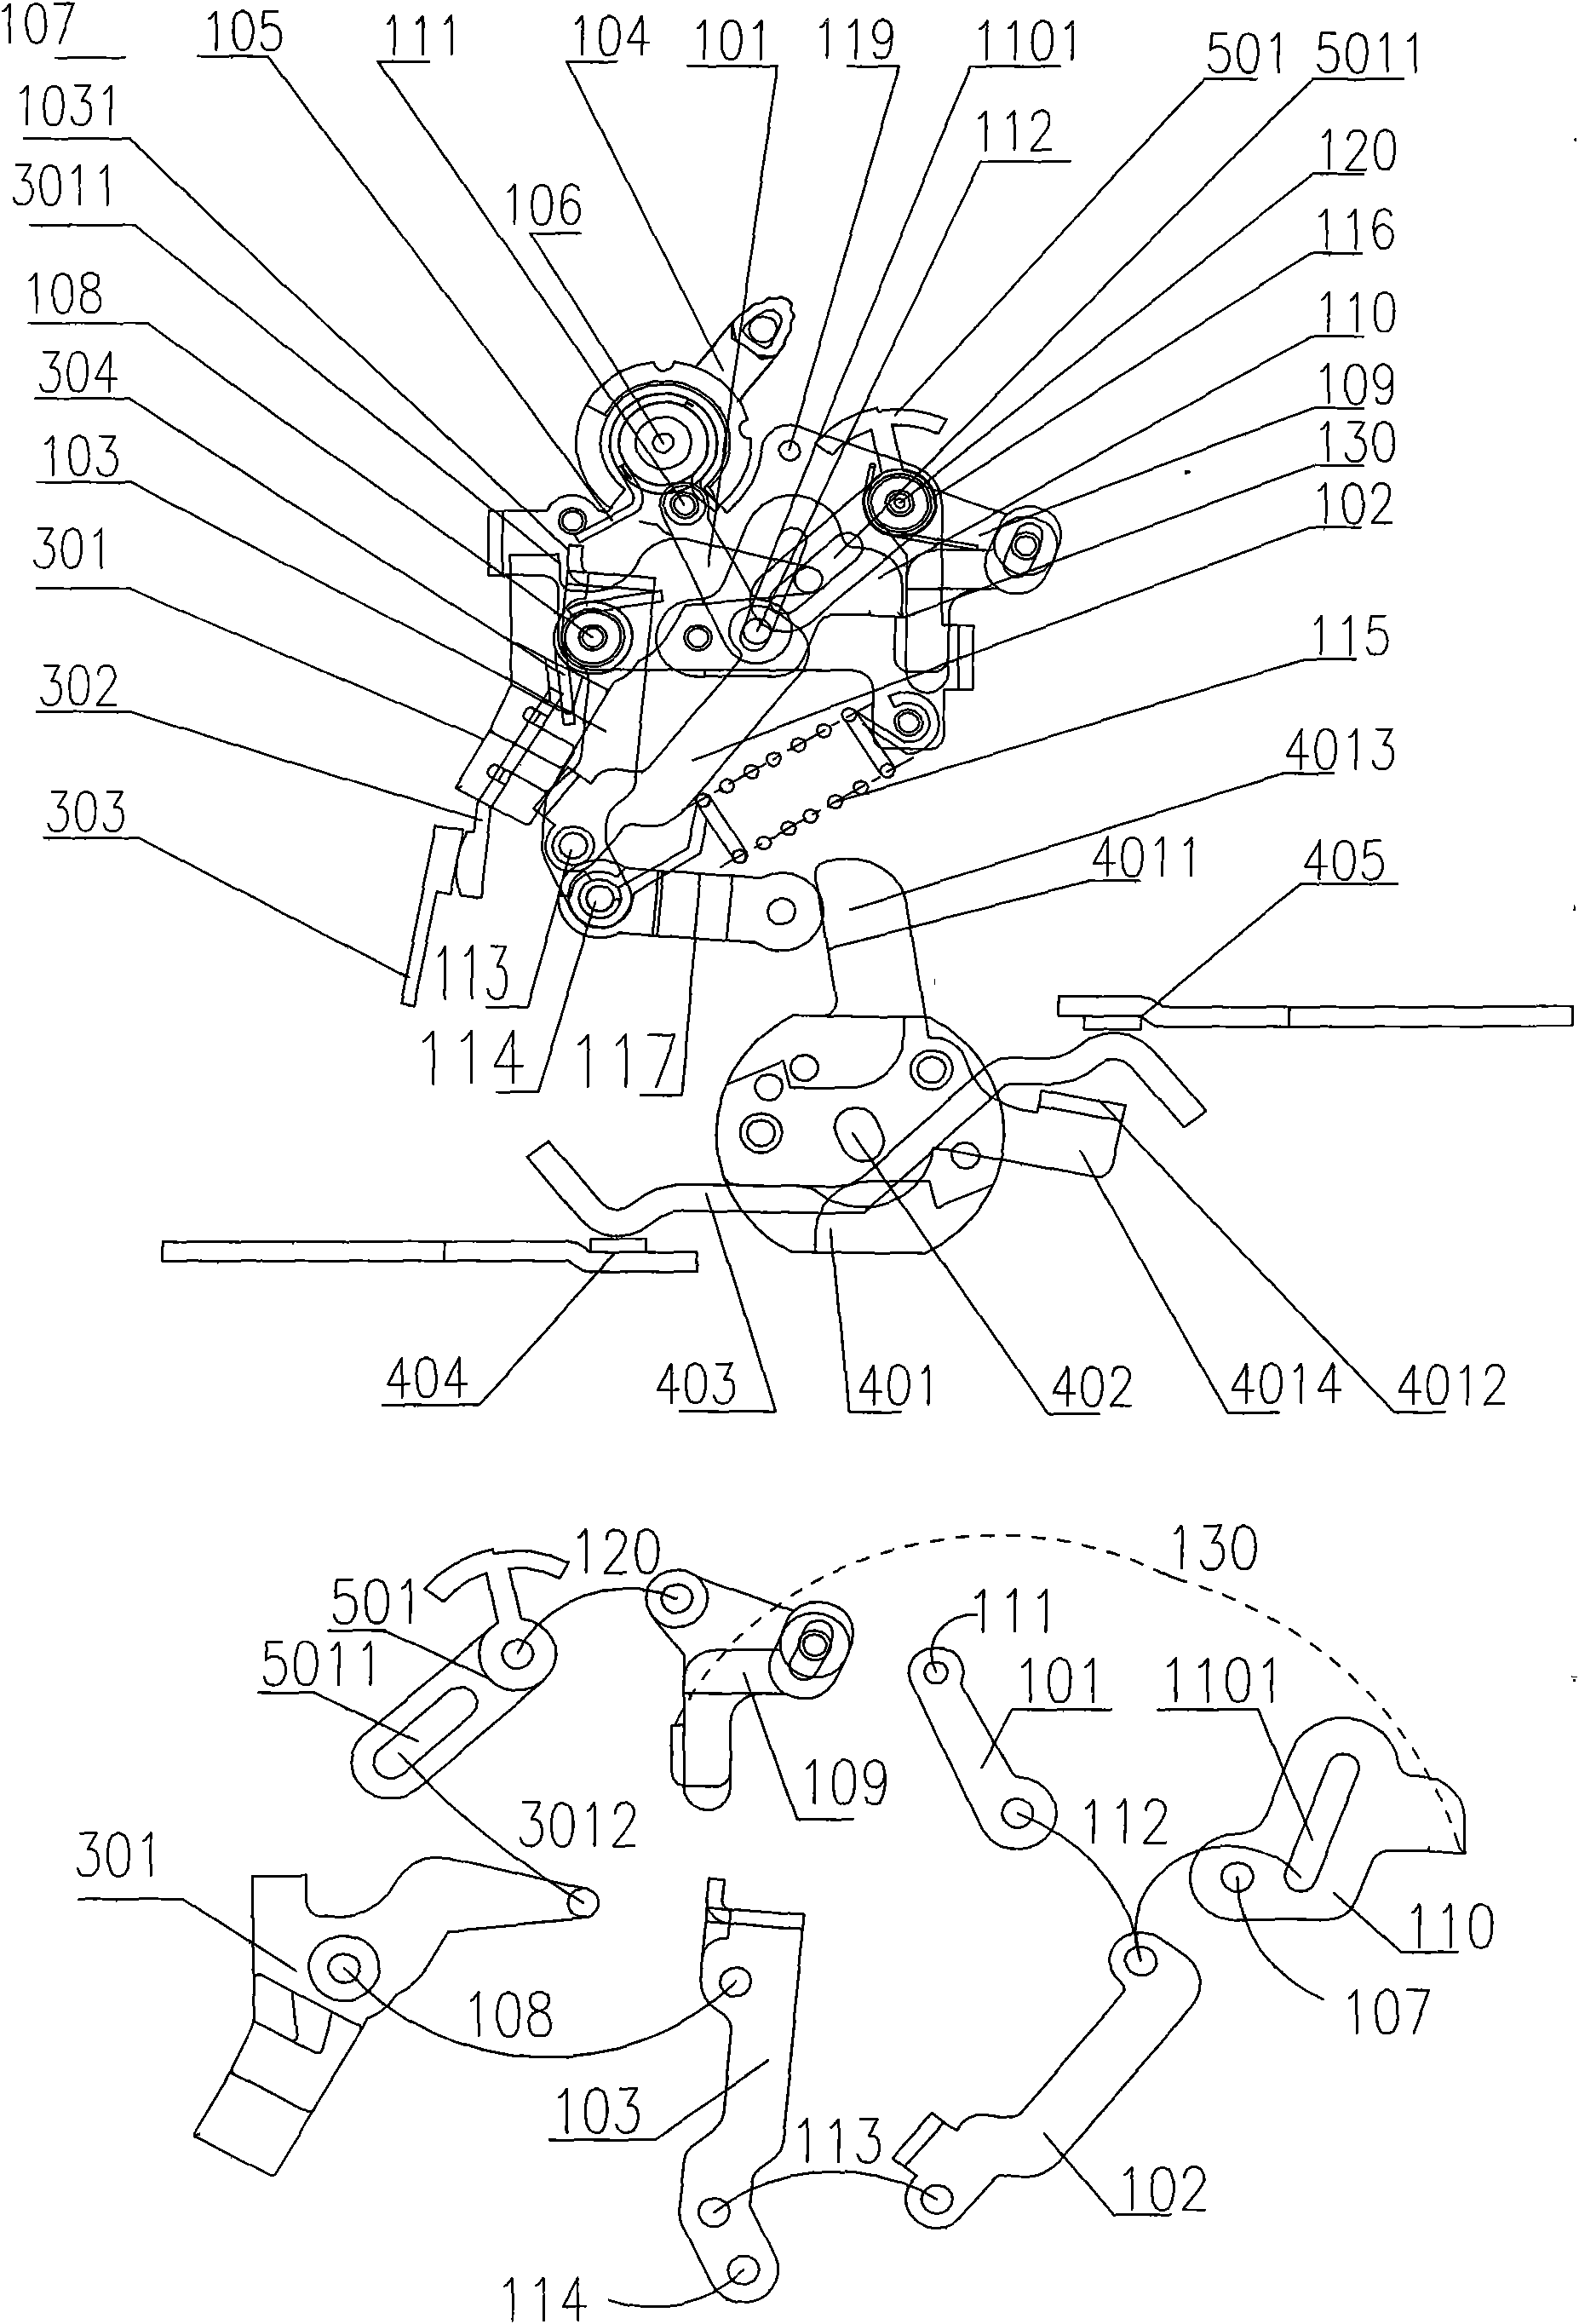 Miniature circuit breaker operation mechanism capable of realizing multi-control input and output